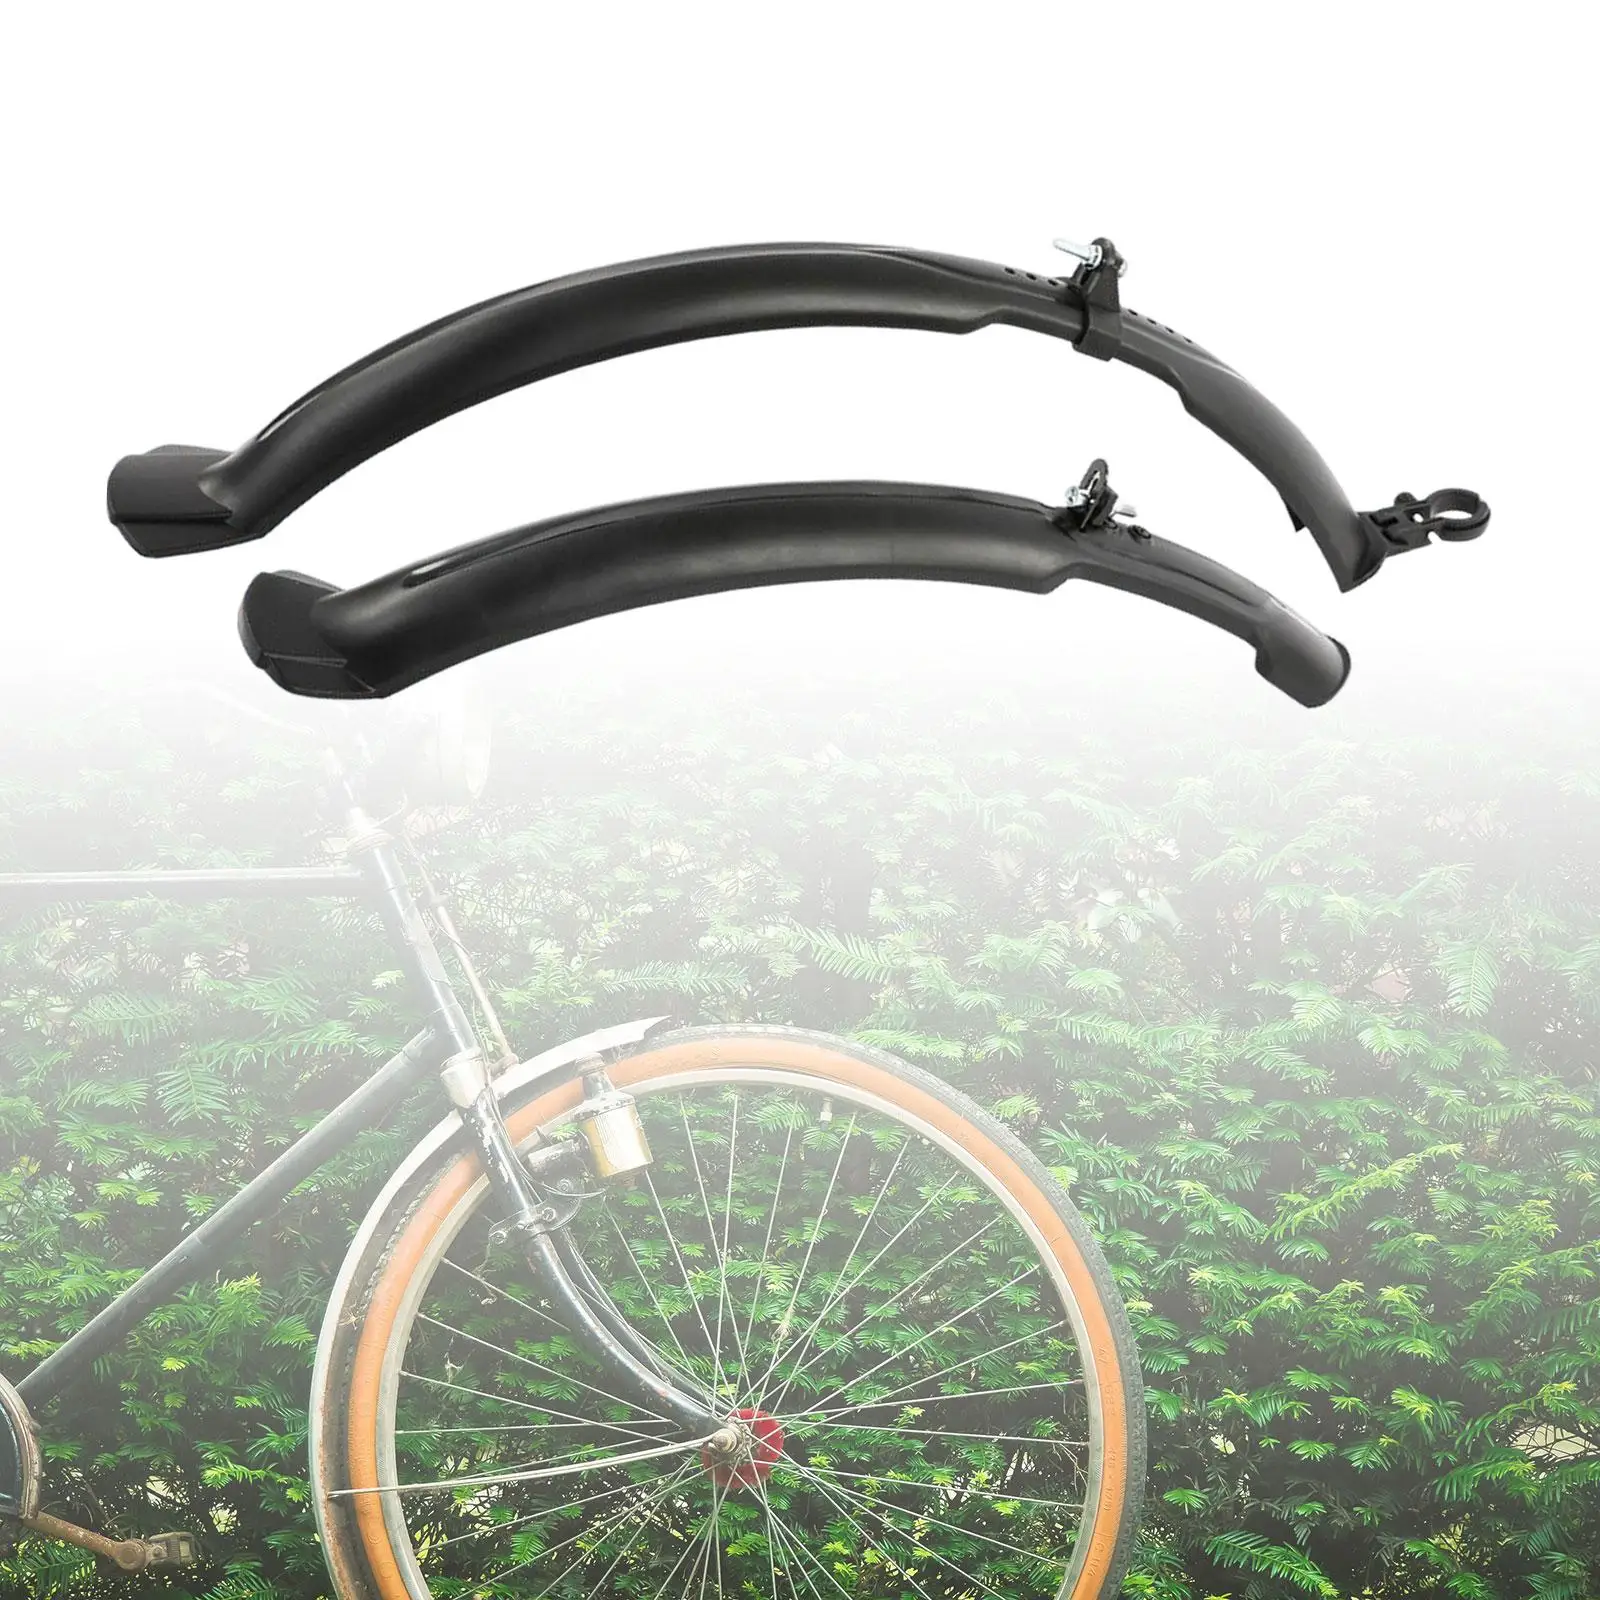 Bike Mud Guard Professional for 24-26inch Durable Bike Mudguard for Mountain Bikes Mountain Bike Traveling Outdoor Riding